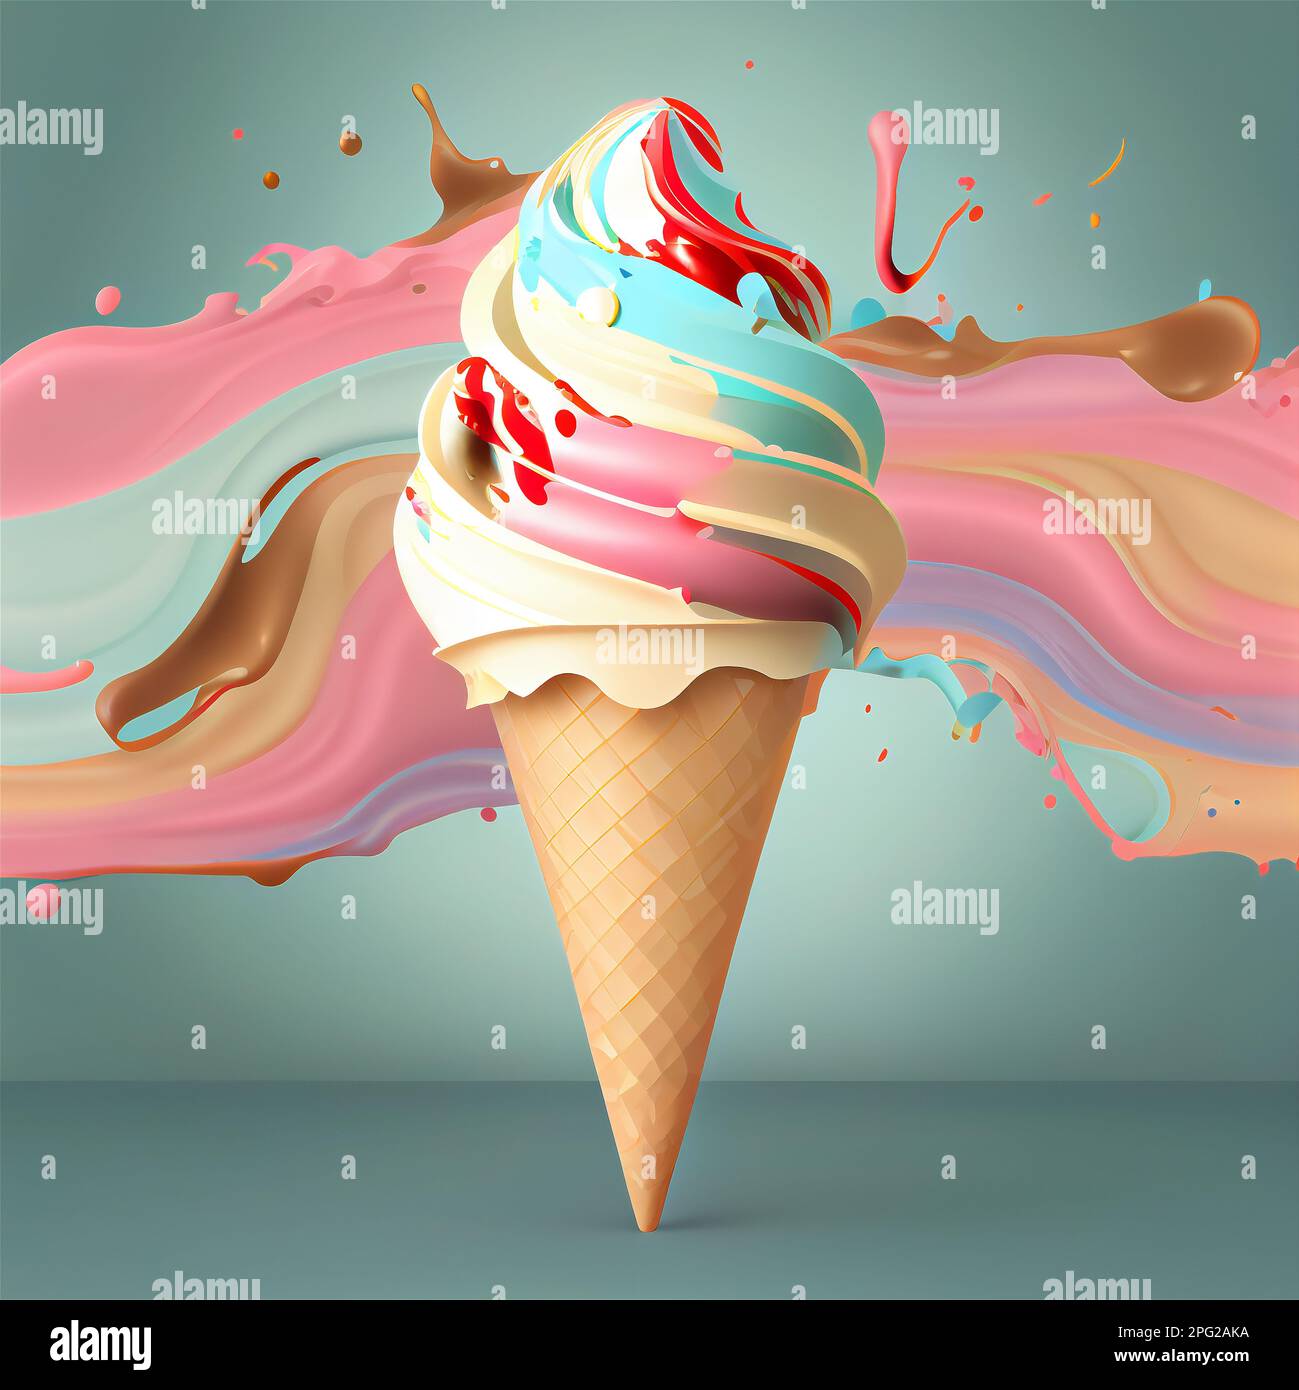 Realistic detailed 3d ice cream scoops set Vector Image